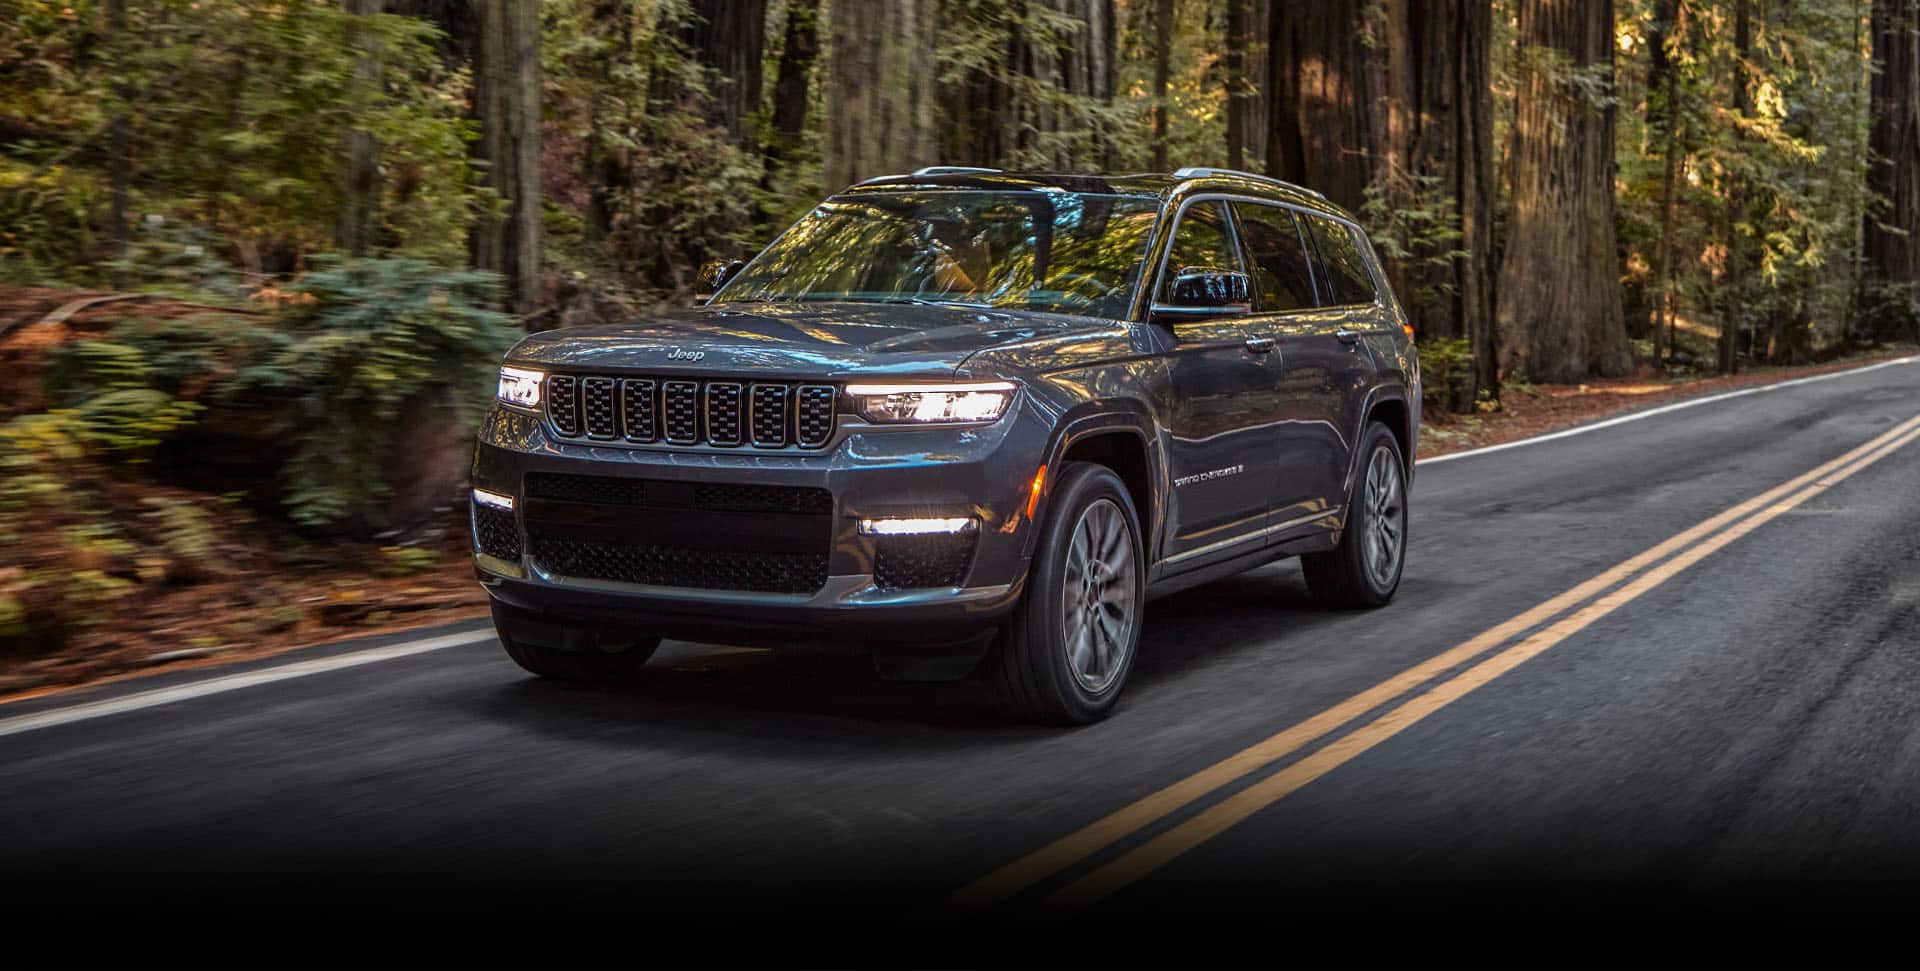 The 2022 Jeep Grand Cherokee L Summit being driven on a paved road surrounded by trees.